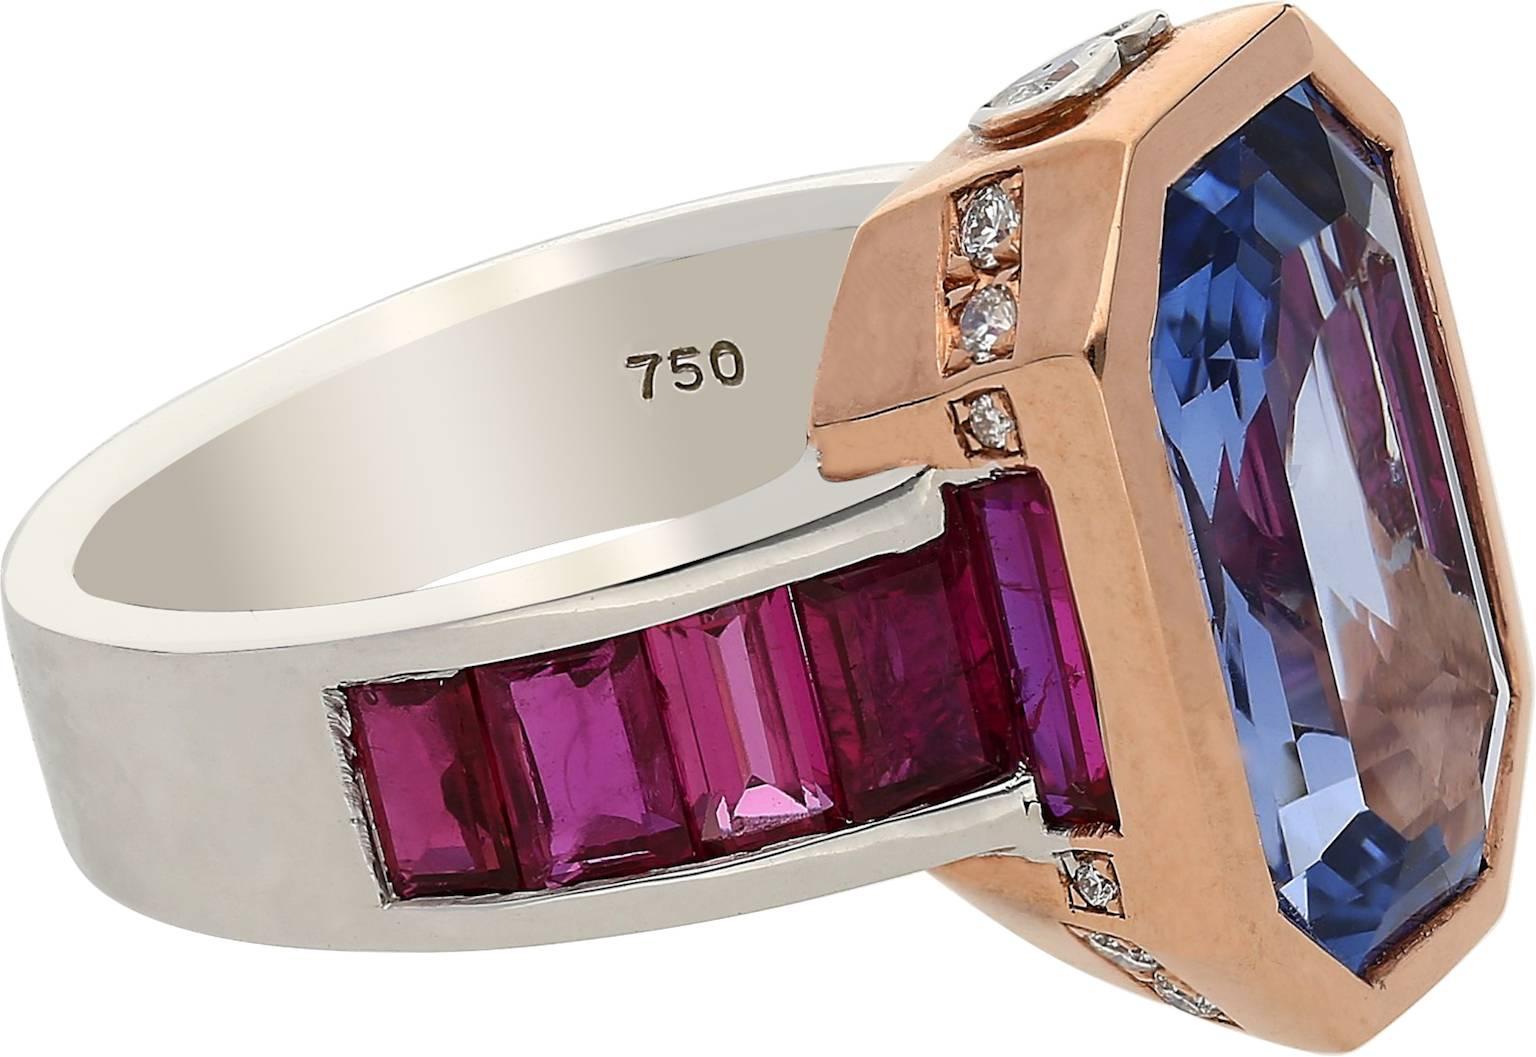 6.79 carat emerald cut ceylon Sri-Lanka Unheated Sapphire.
10.13 carat total weight.
3.06 carat Rubies.
0.28 carats of Diamonds.
GRS Certified.
GRS determined that Sapphire displays no signs of thermal treatment.
Set in 18k white and rose gold.